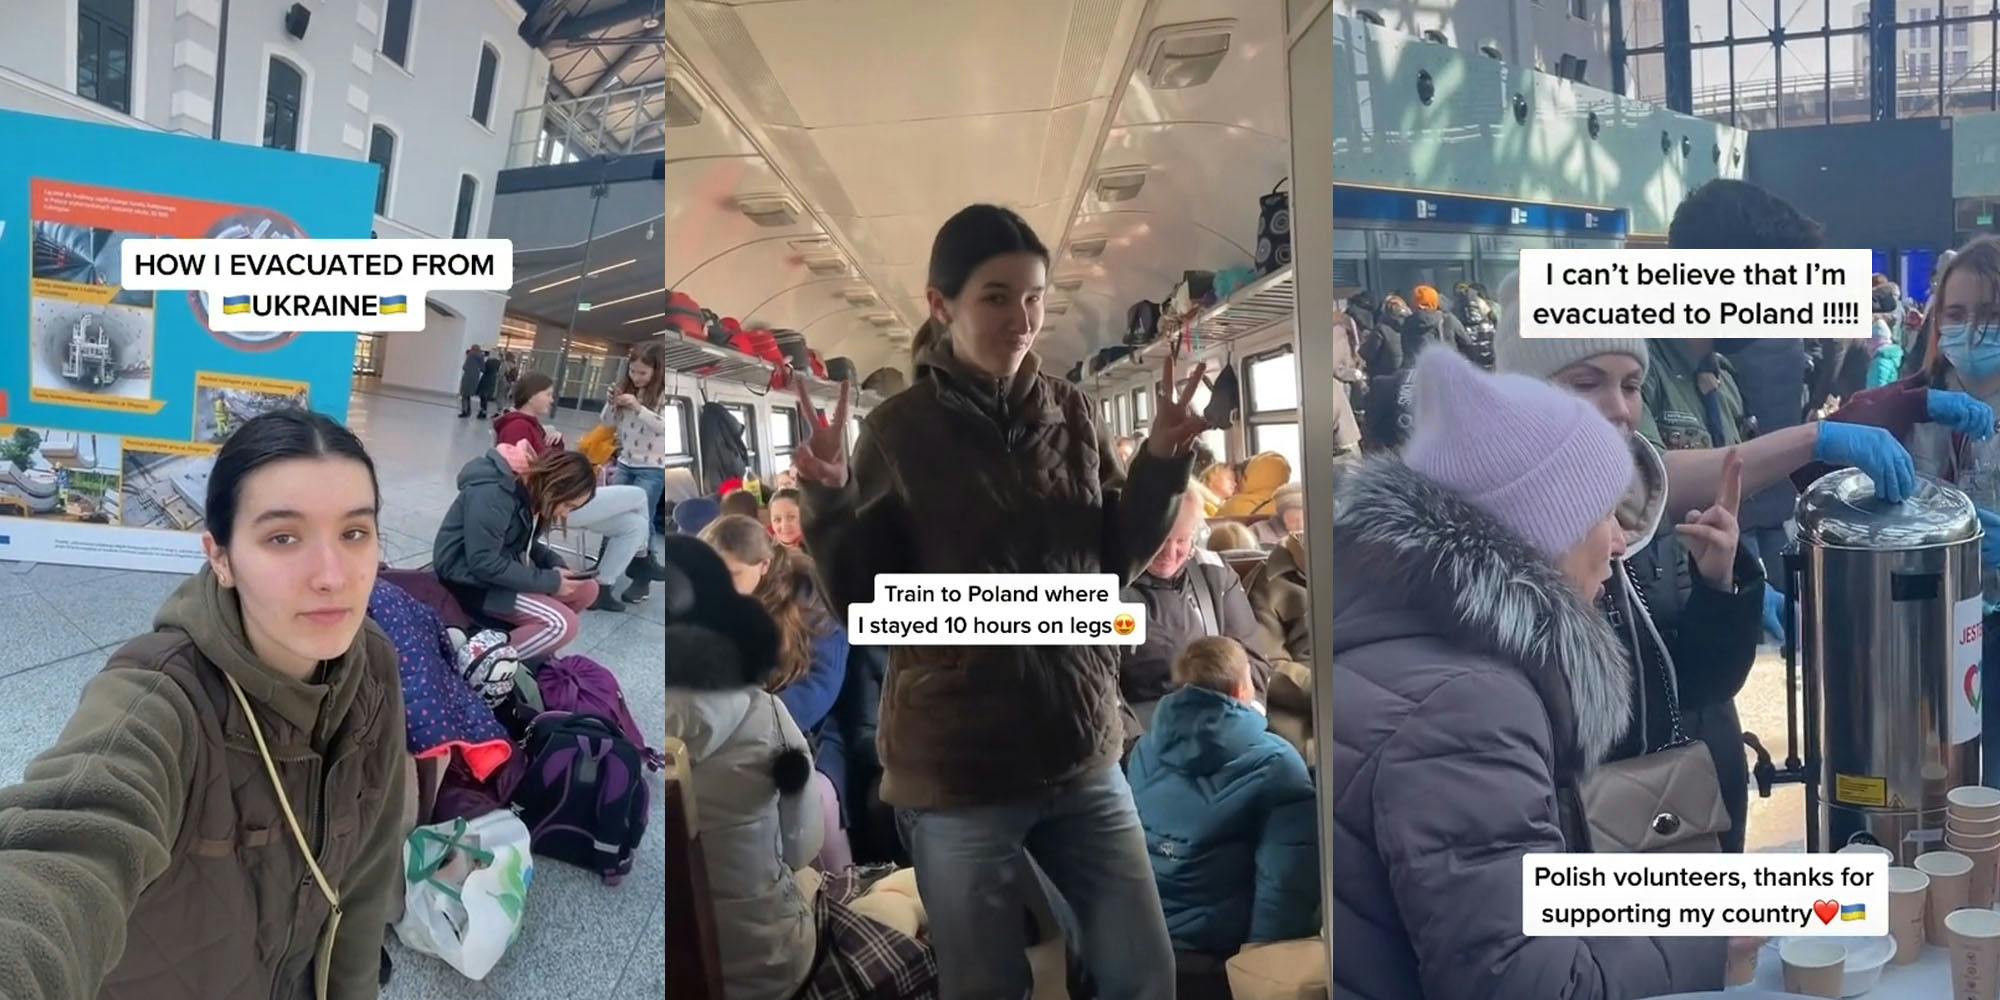 woman in public caption " How I evacuated from Ukraine" (l) Woman standing in crowded train peace signs caption " Train to Poland where I stayed 10 hours on leg" (c) People feeding refugees caption " I can't believe I'm evacuated to Poland!!!!! Polish volunteers, thanks for supporting my country" (r)s